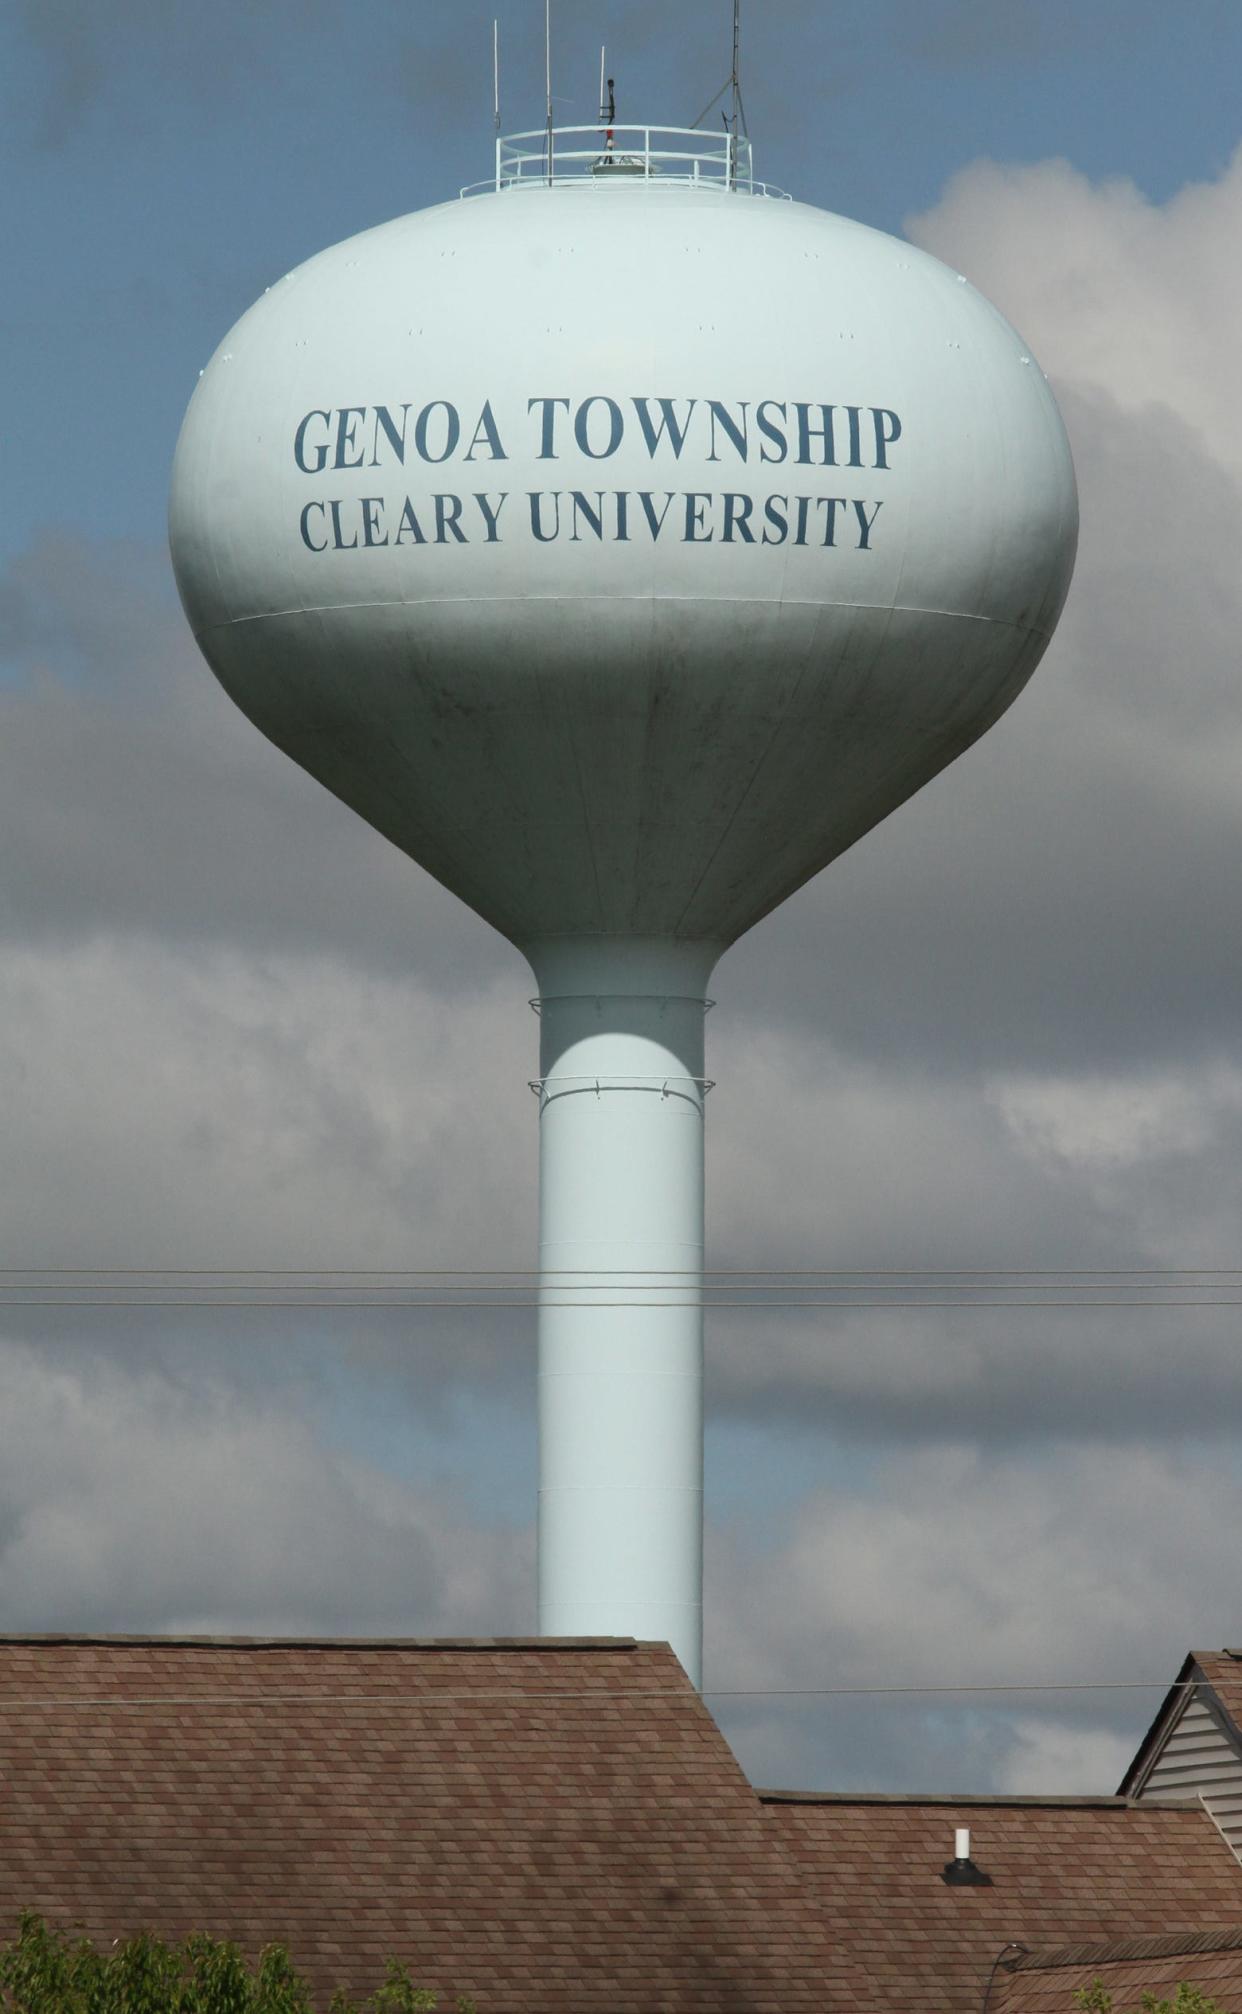 Genoa Township Board of Trustees voted to impose a six-month moratorium at their March 20 meeting.